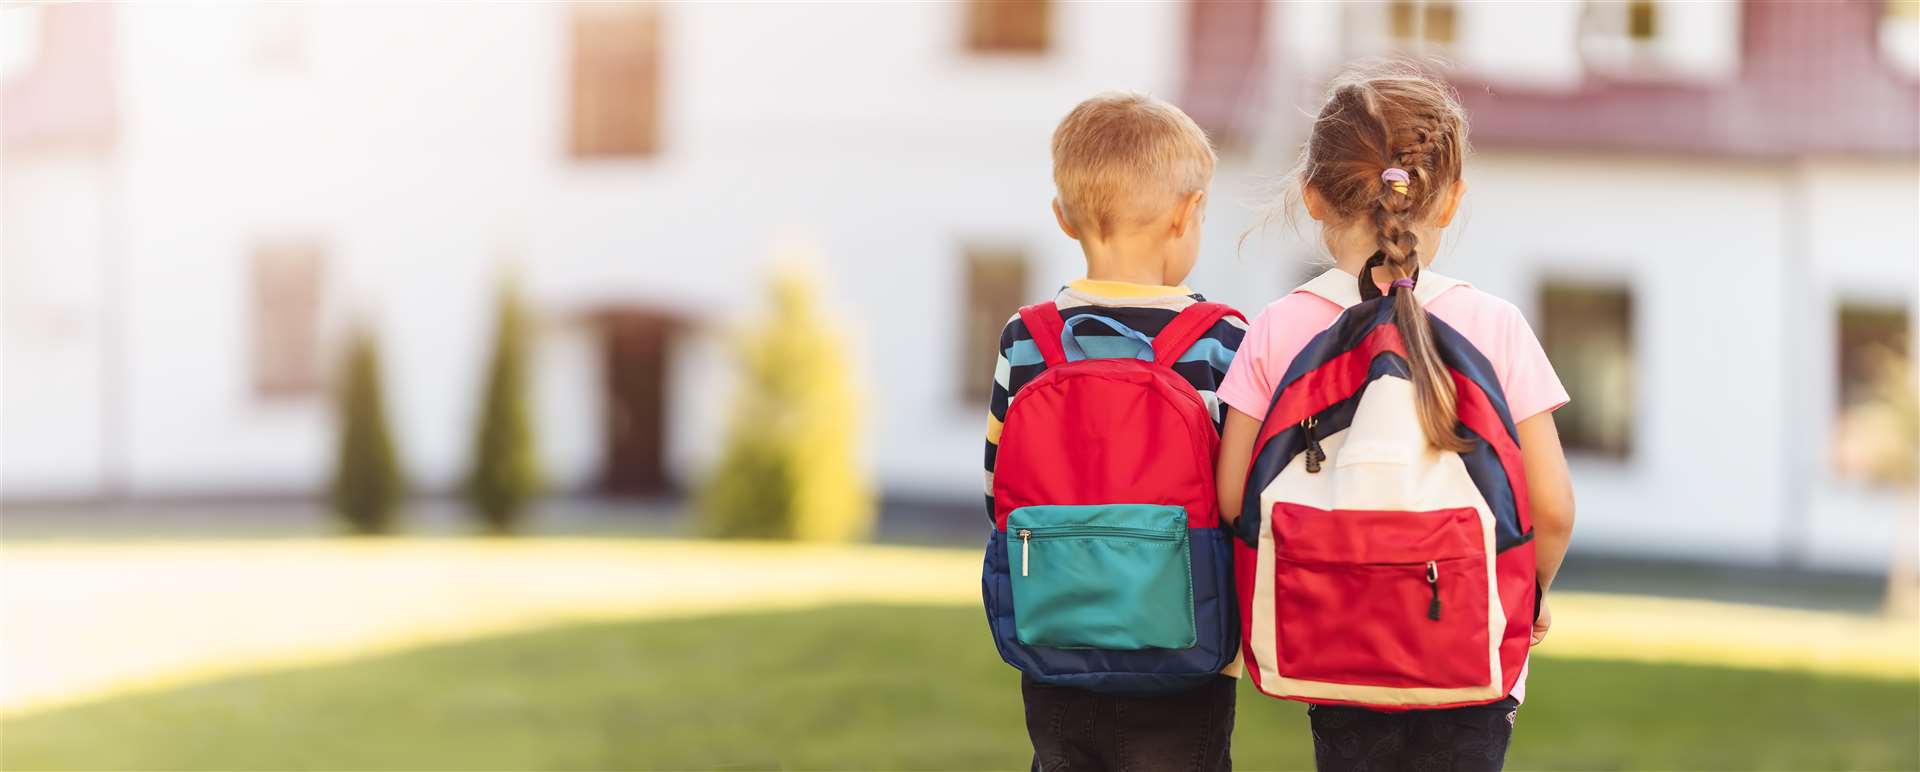 The school age payment can help towards buying bags and equipment for school.